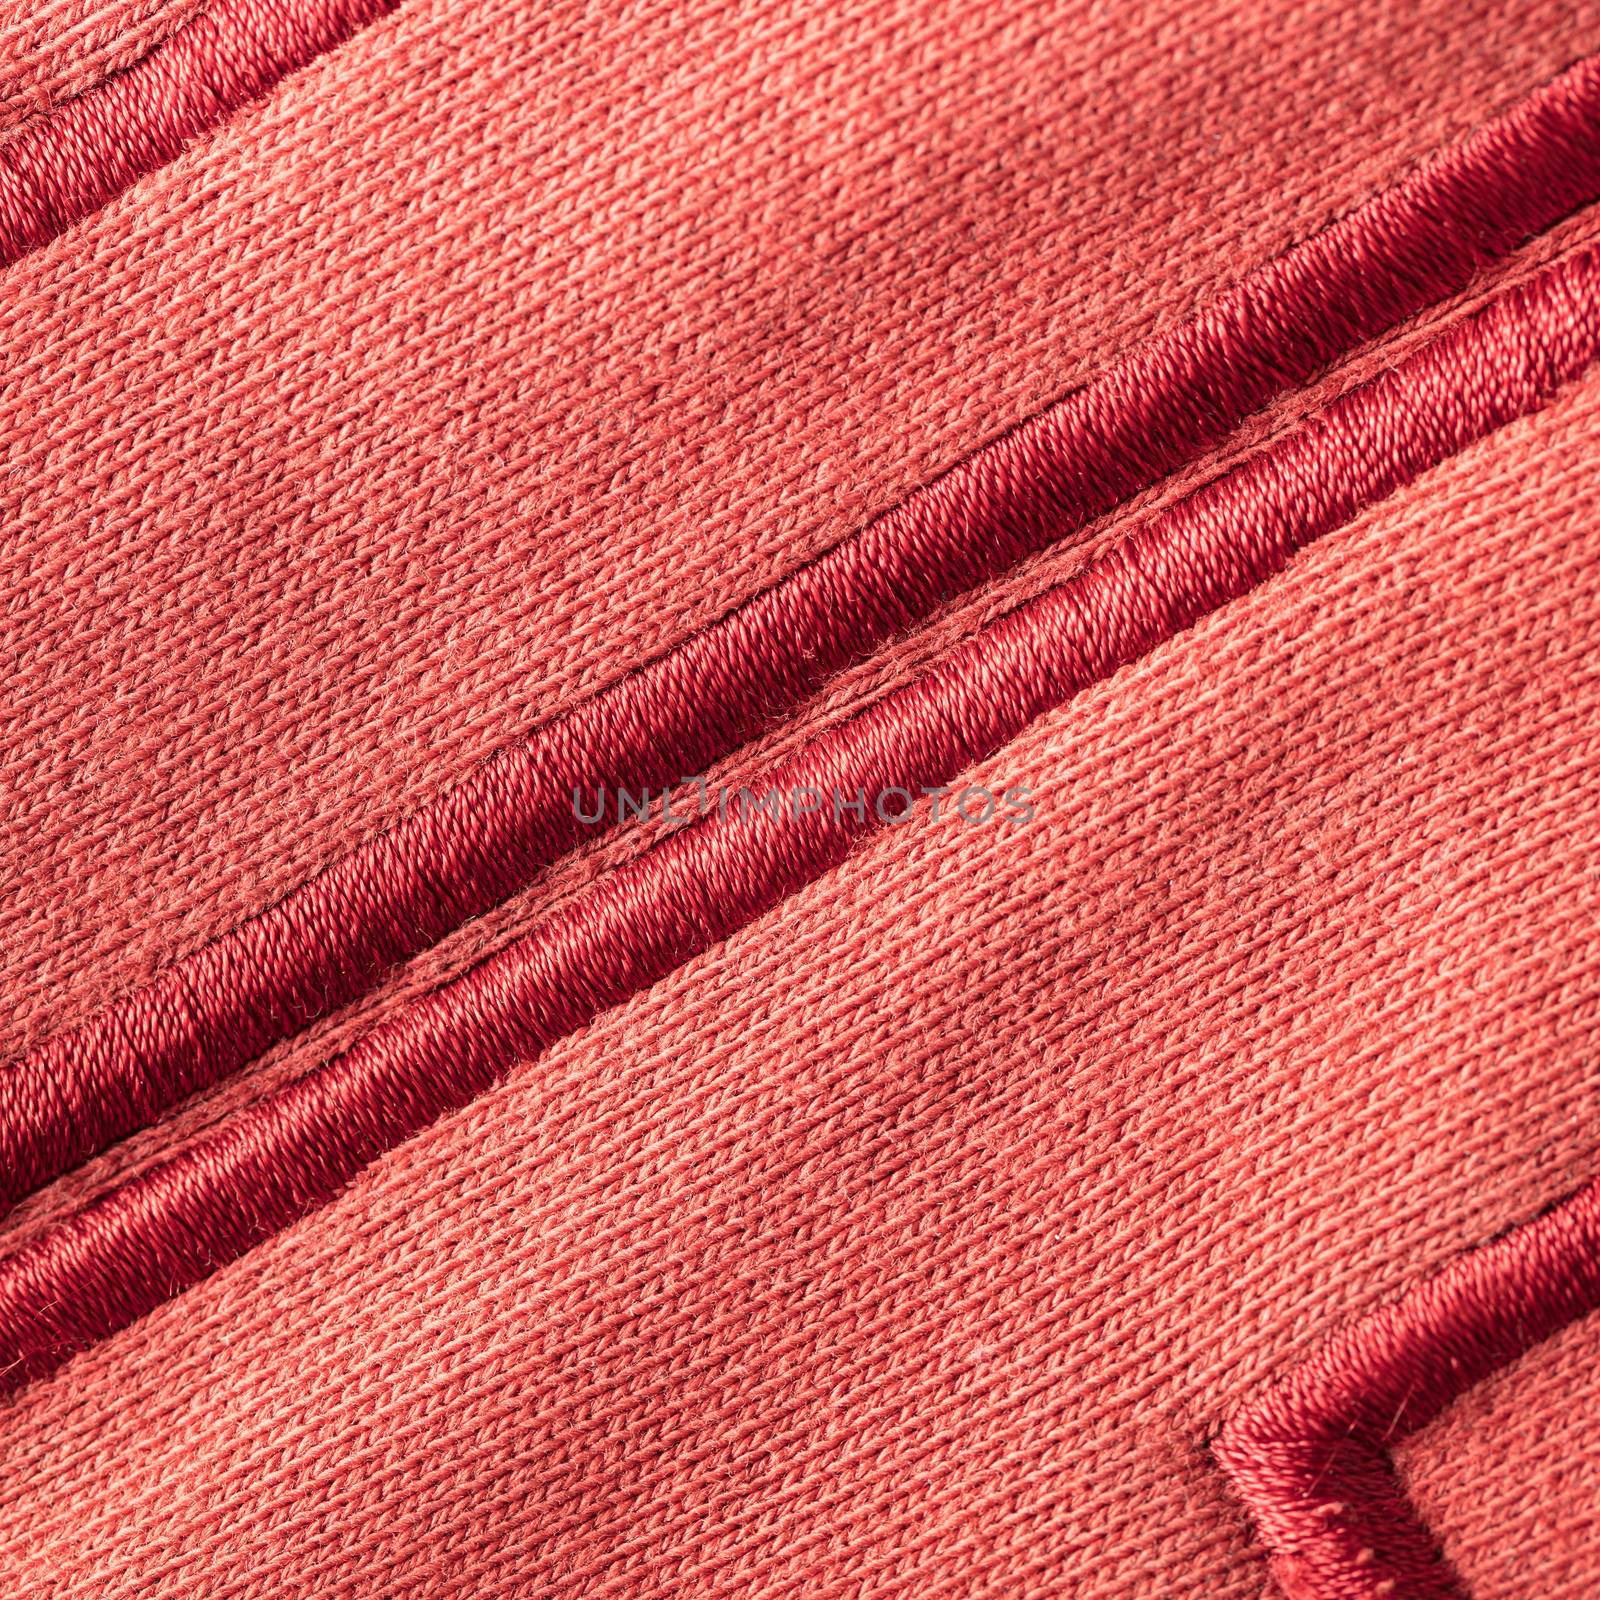 the abstract background texture of a knitted fabric